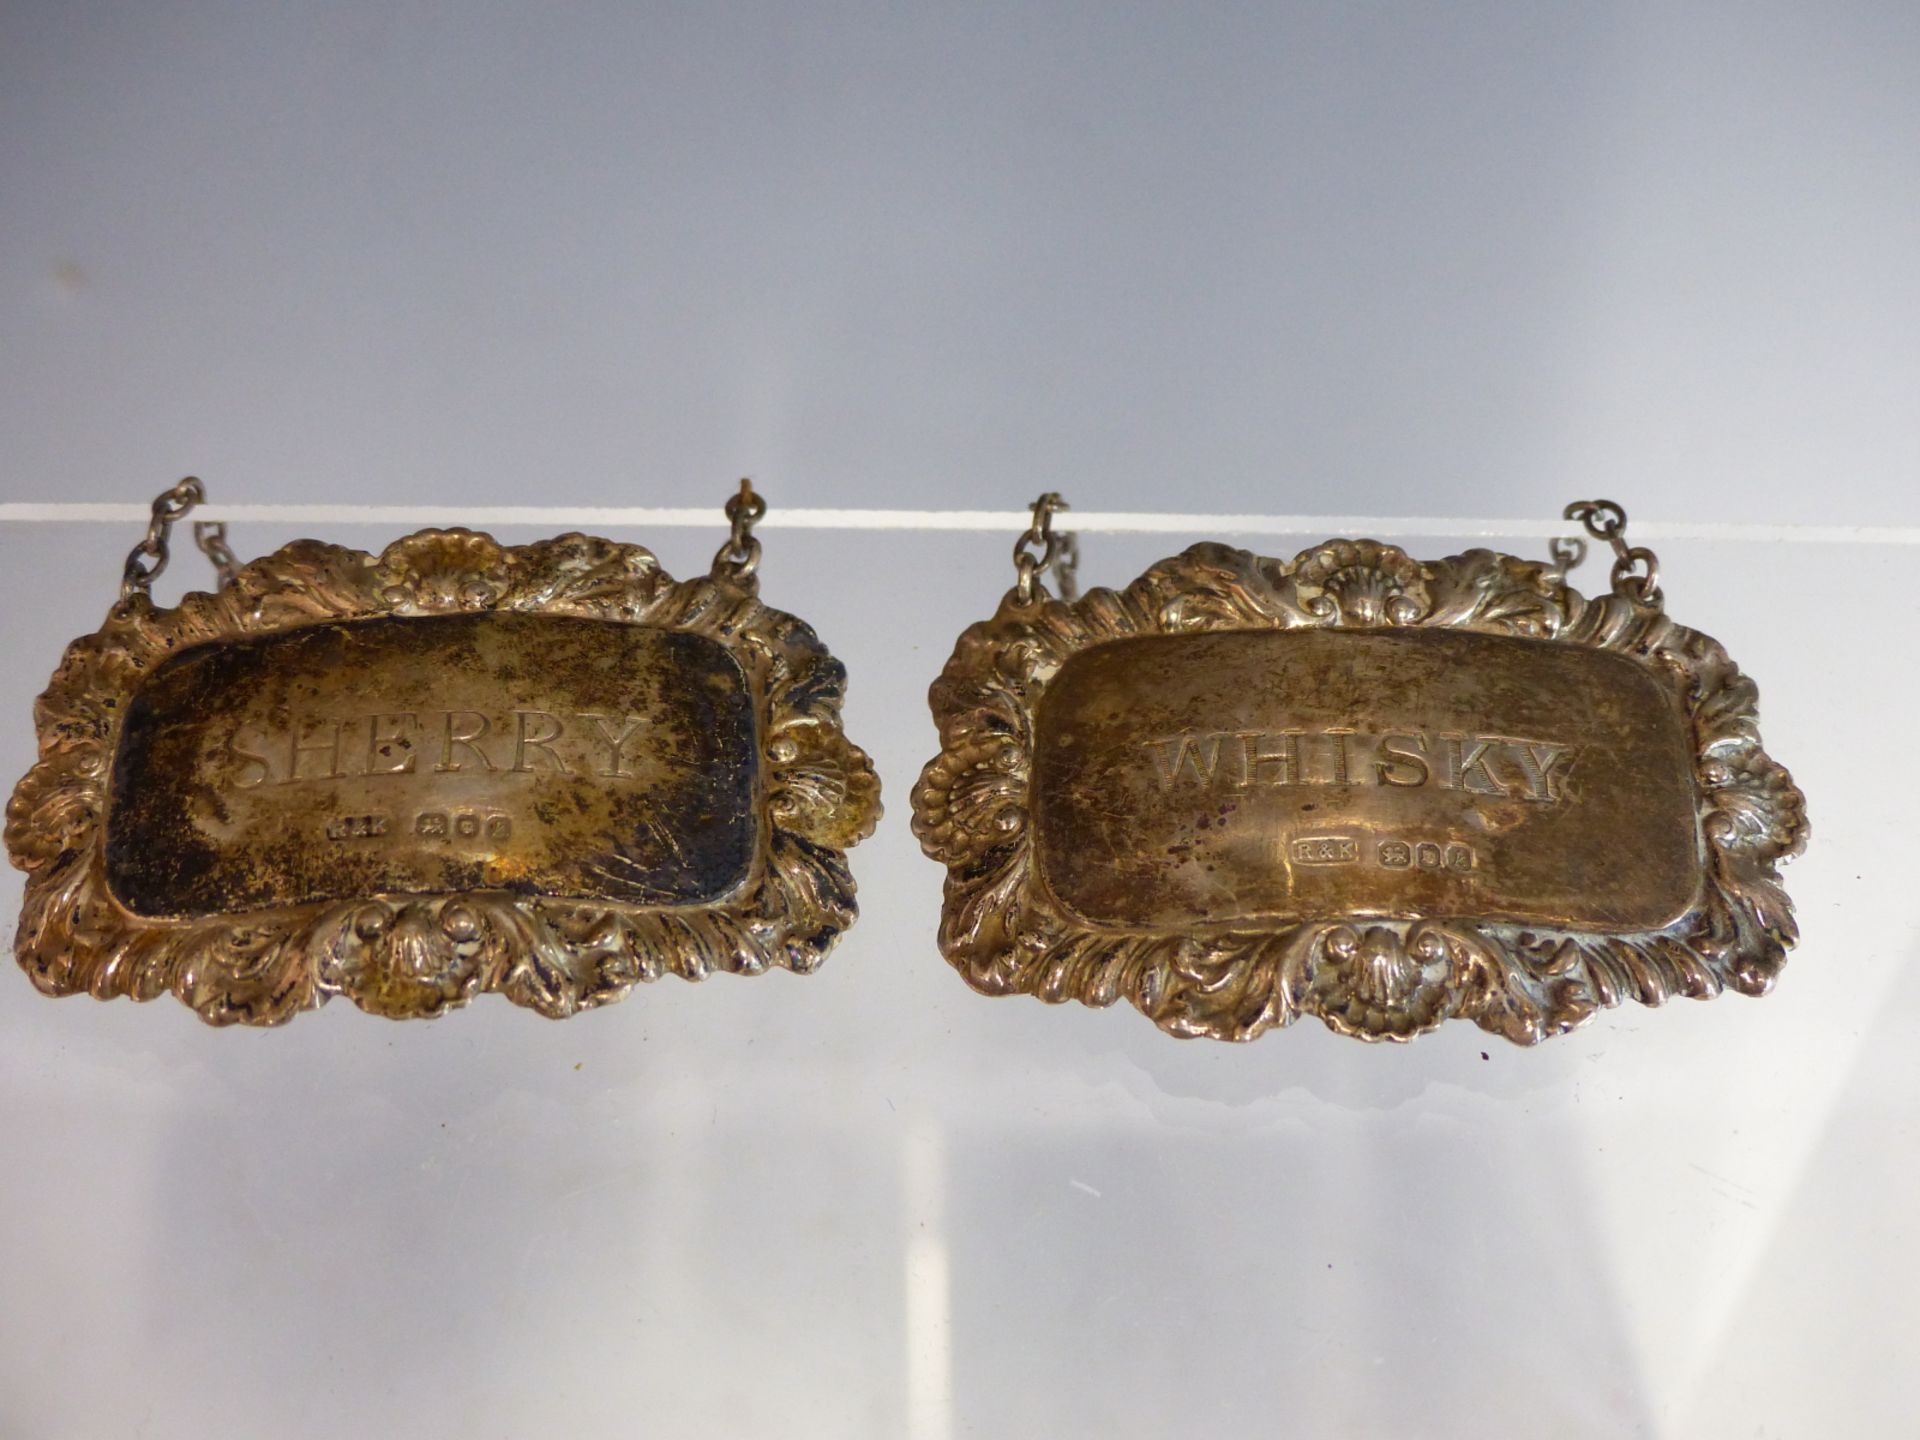 A PAIR OF HALLMARKED SILVER DECANTER LABELS FOR WHISKY AND SHERRY. LONDON HALLMARKS.